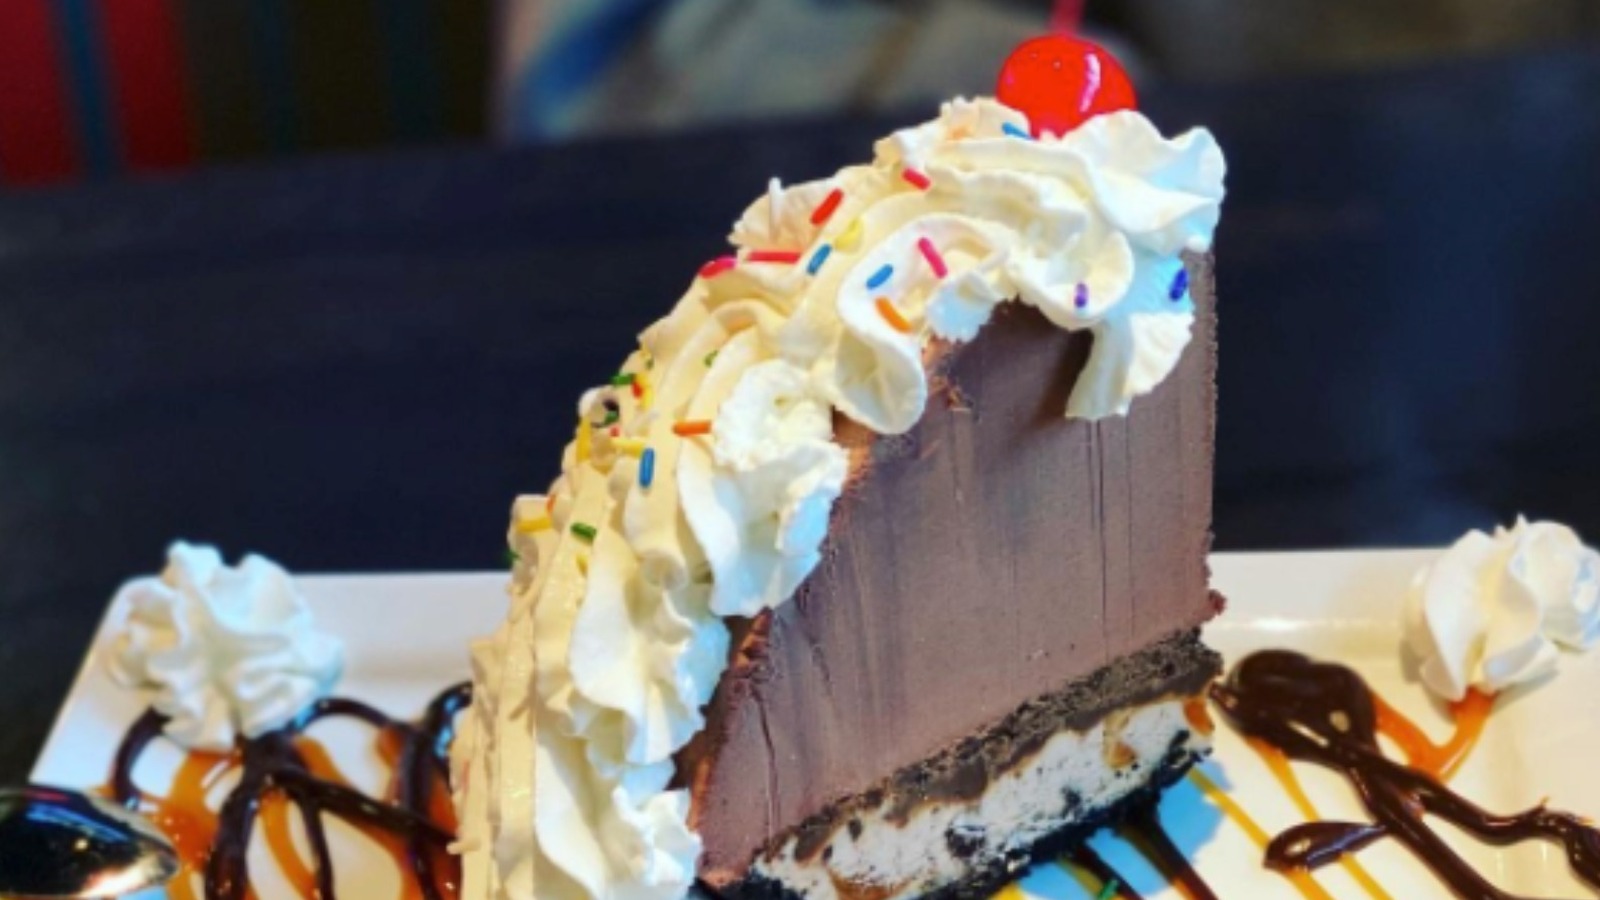 28% Agree This Is Red Robin's Best Dessert